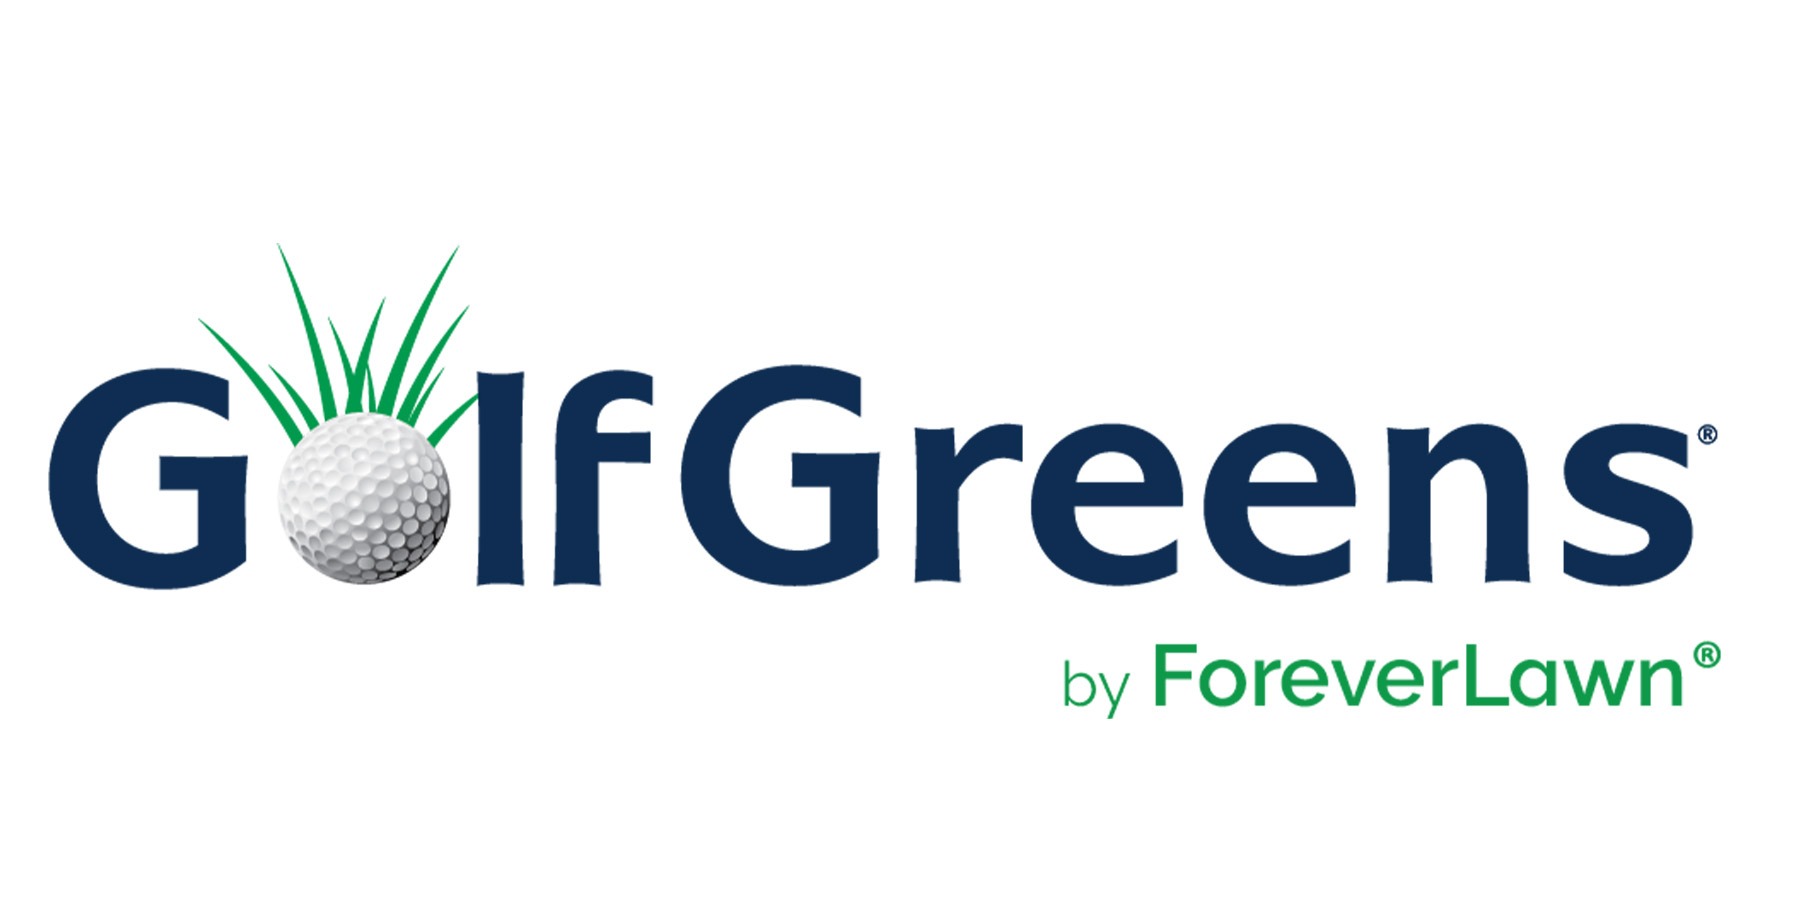 GolfGreens by Forever Lawn logo